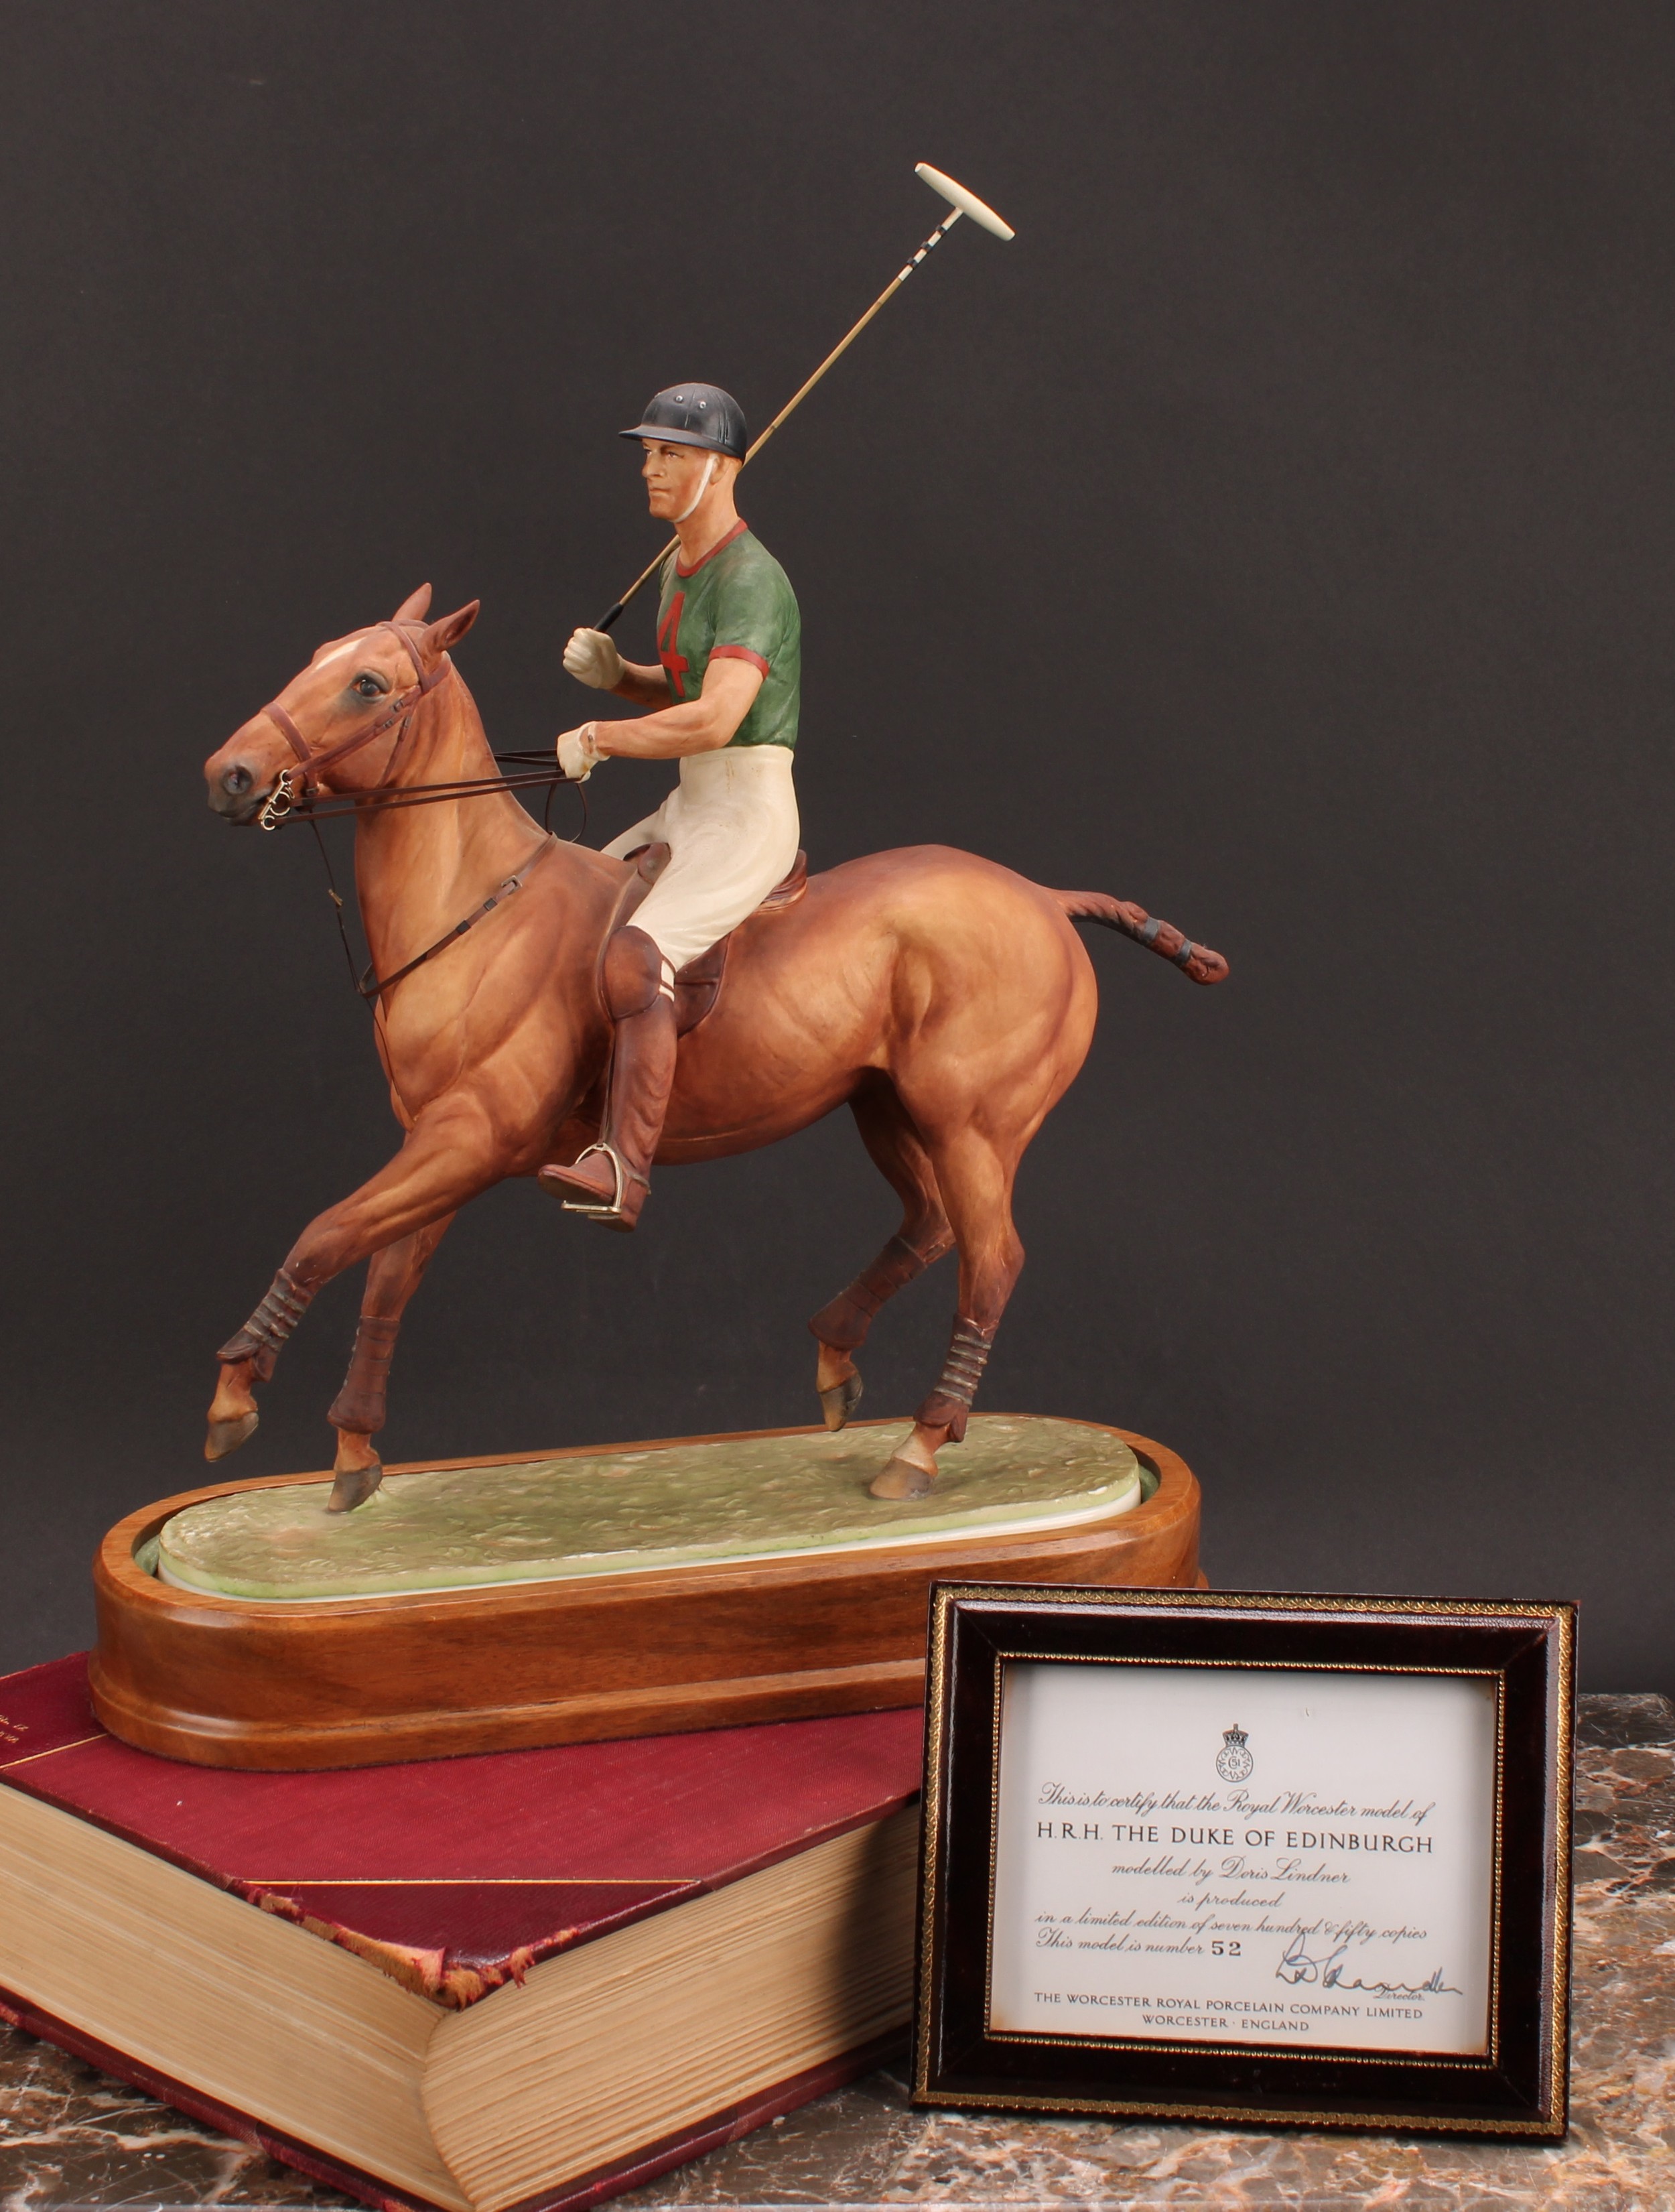 A Royal Worcester equestrian figure, H.R.H The Duke of Edinburgh, playing polo, limited edition no.